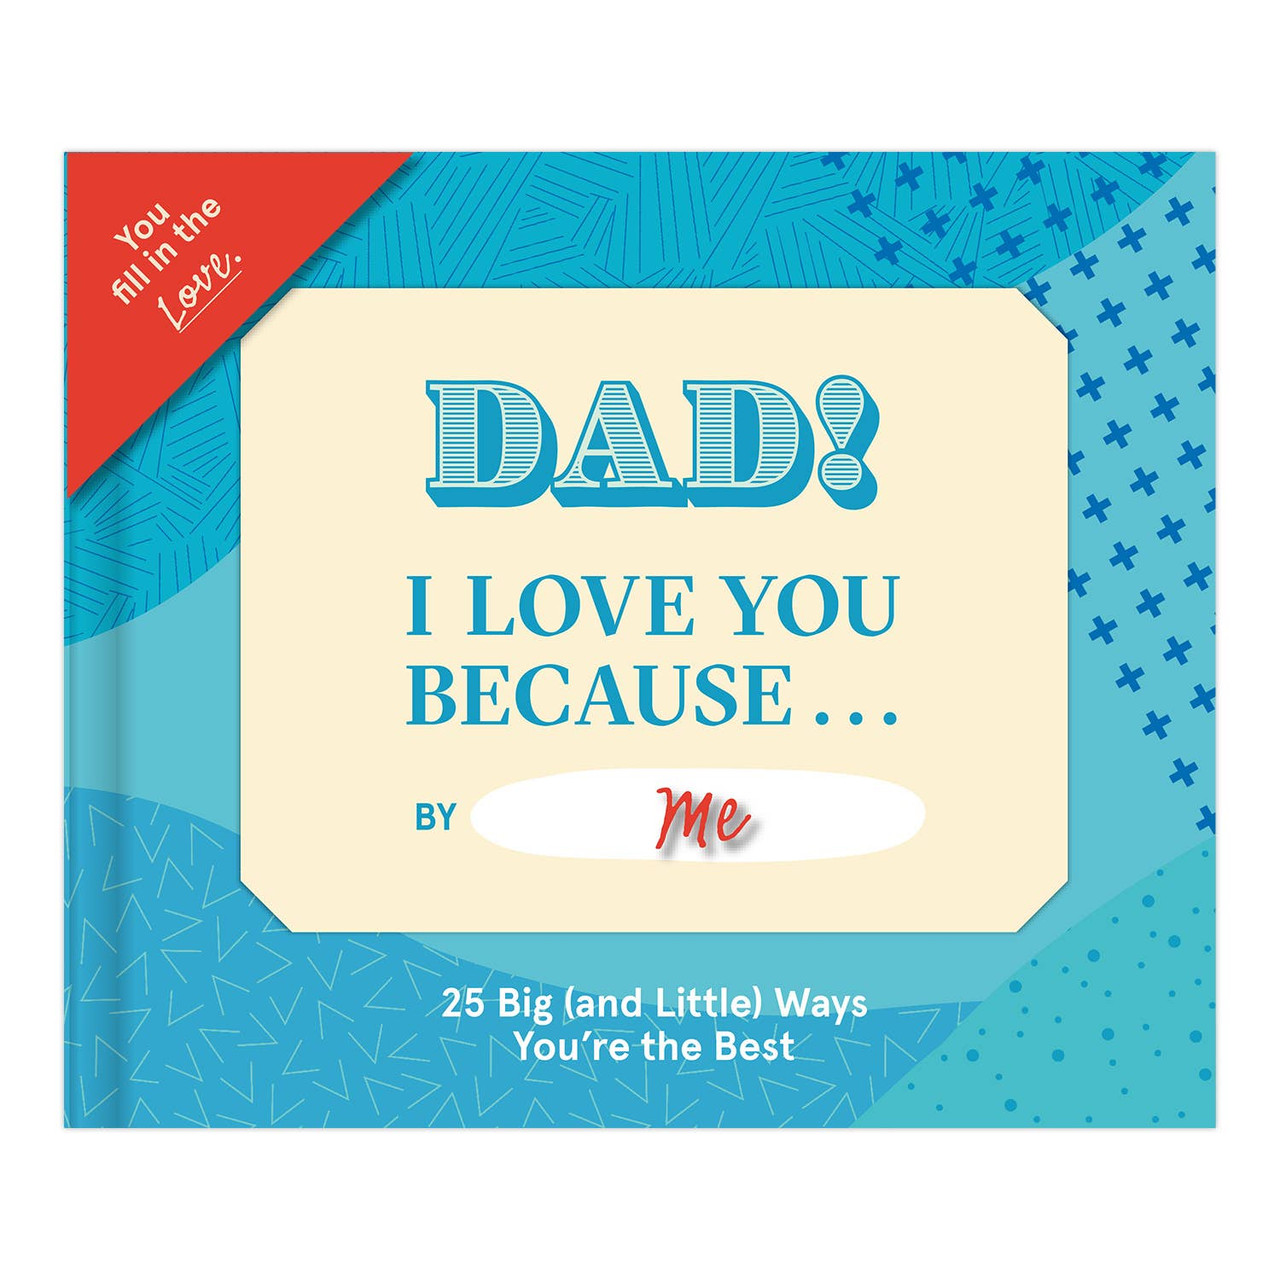 dad, I love you because - catching fireflies